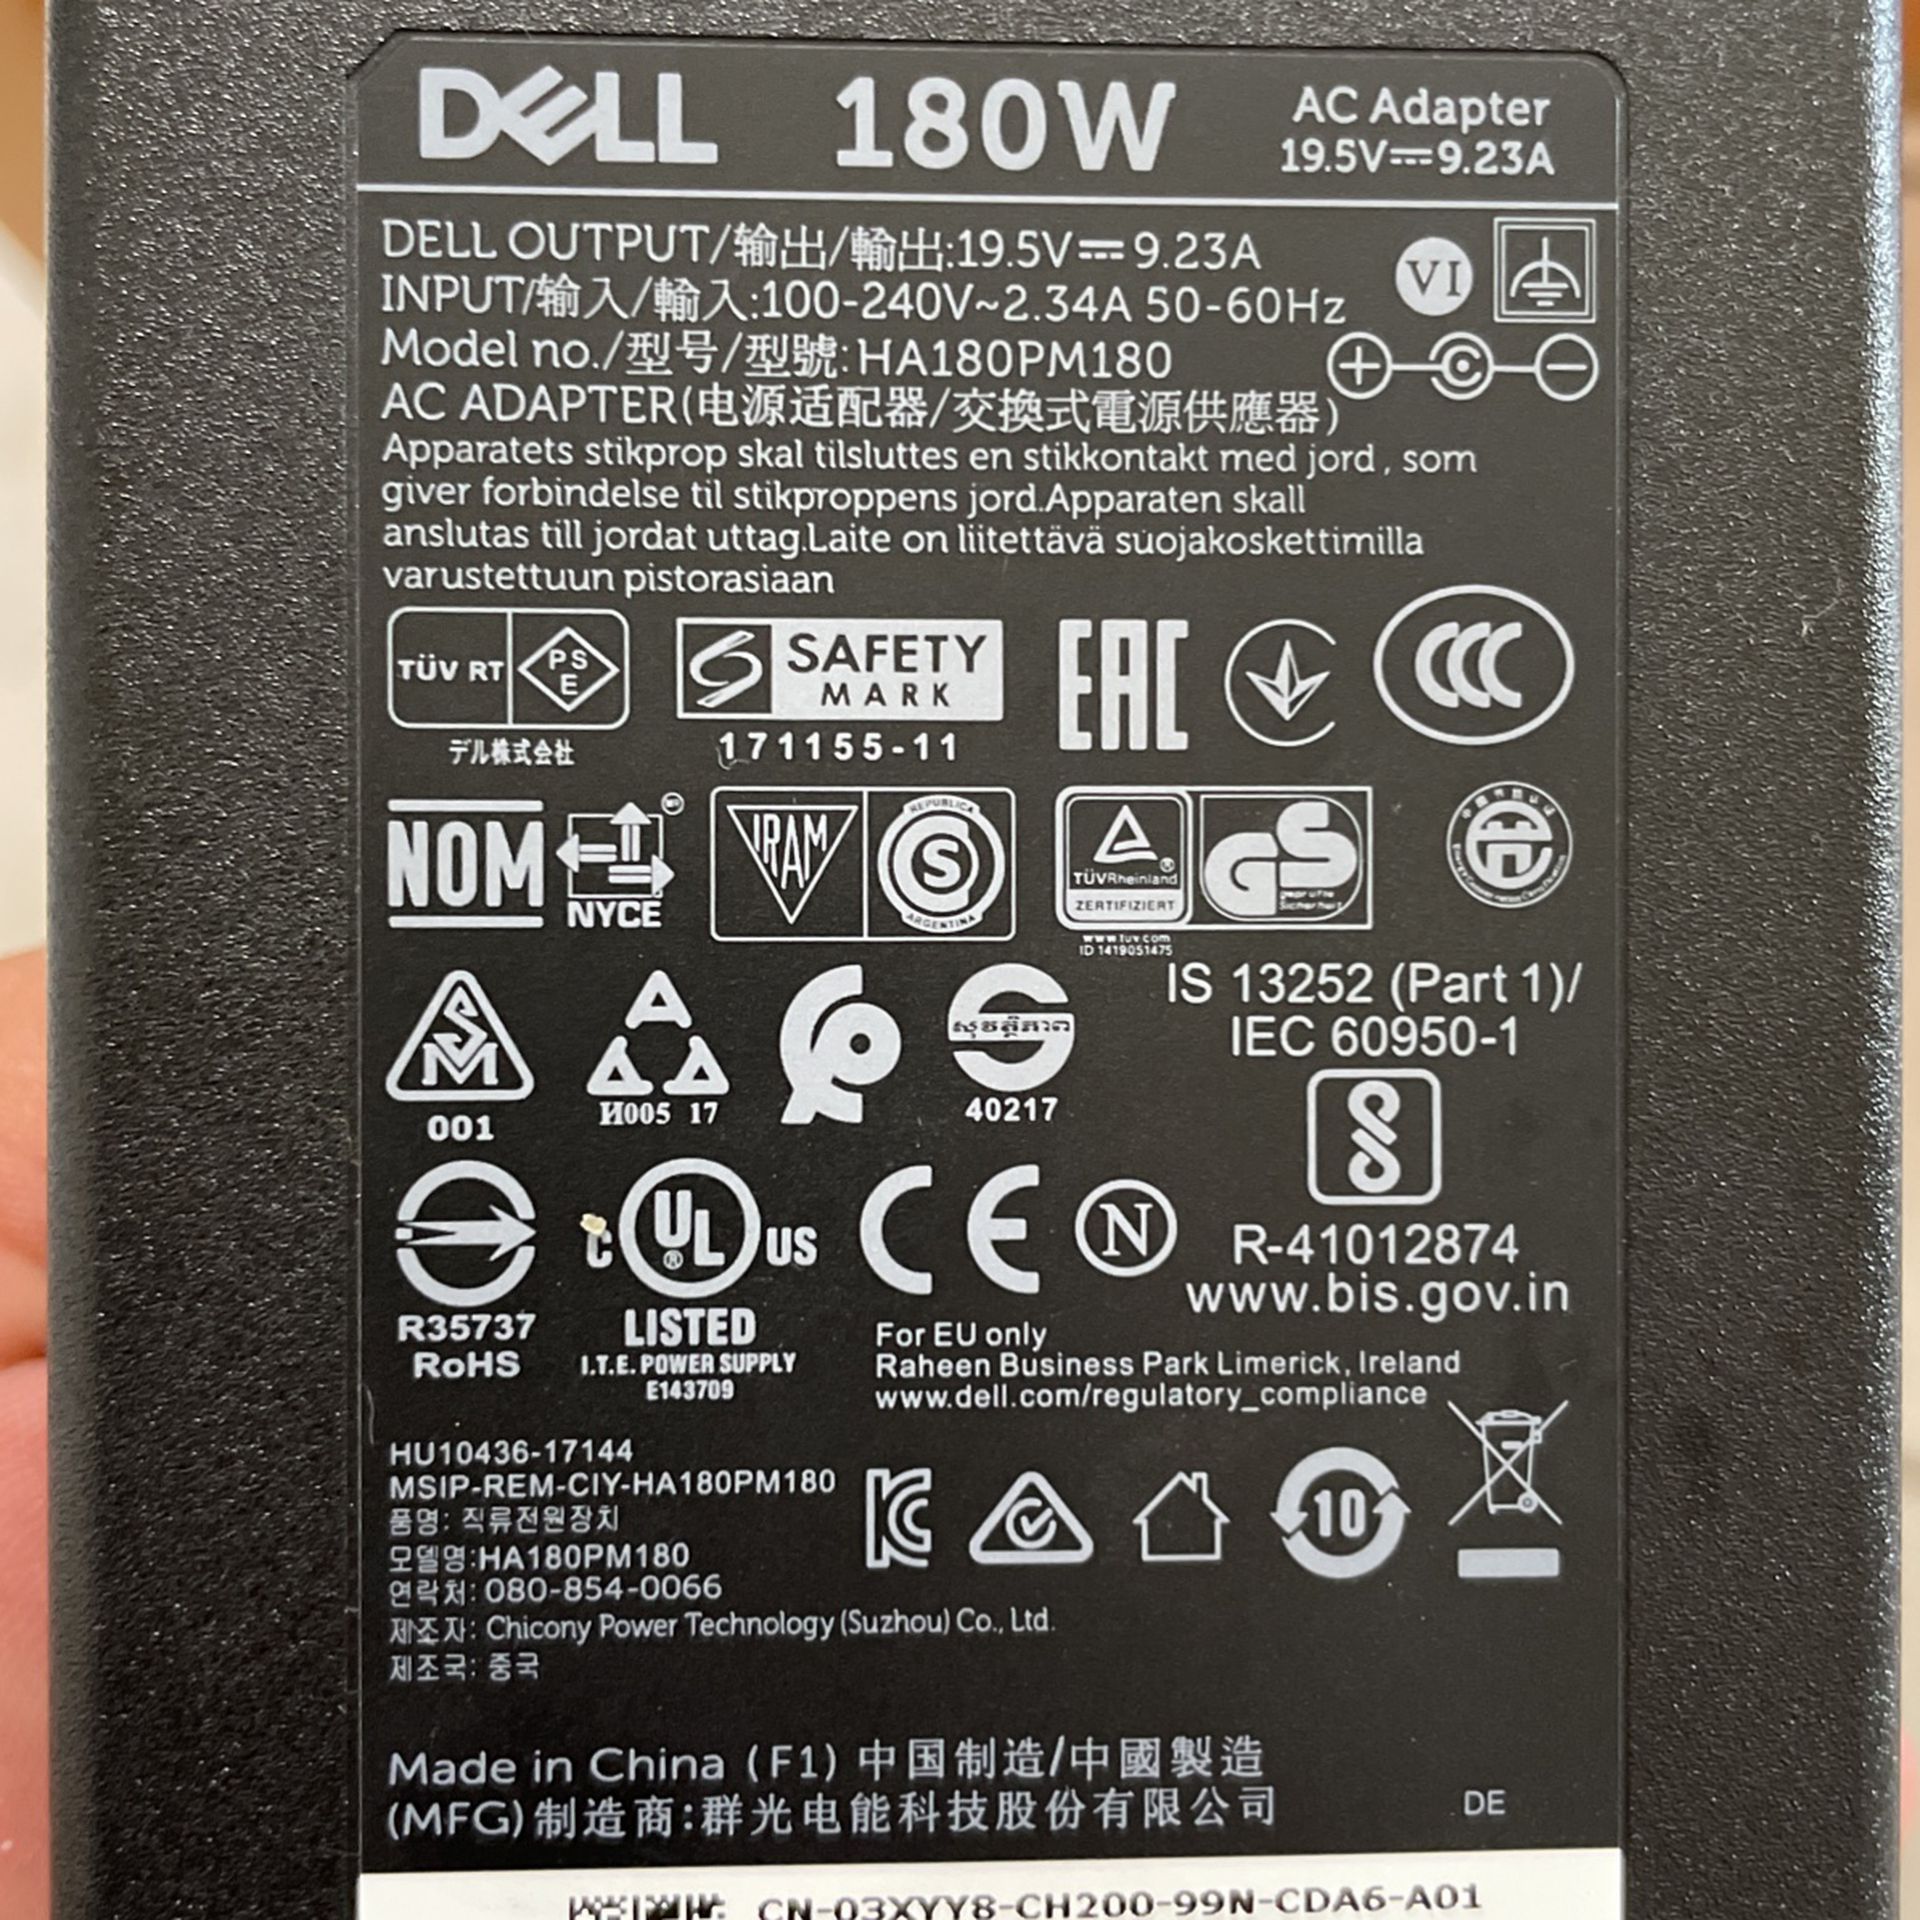 Dell 180w AC Adapter